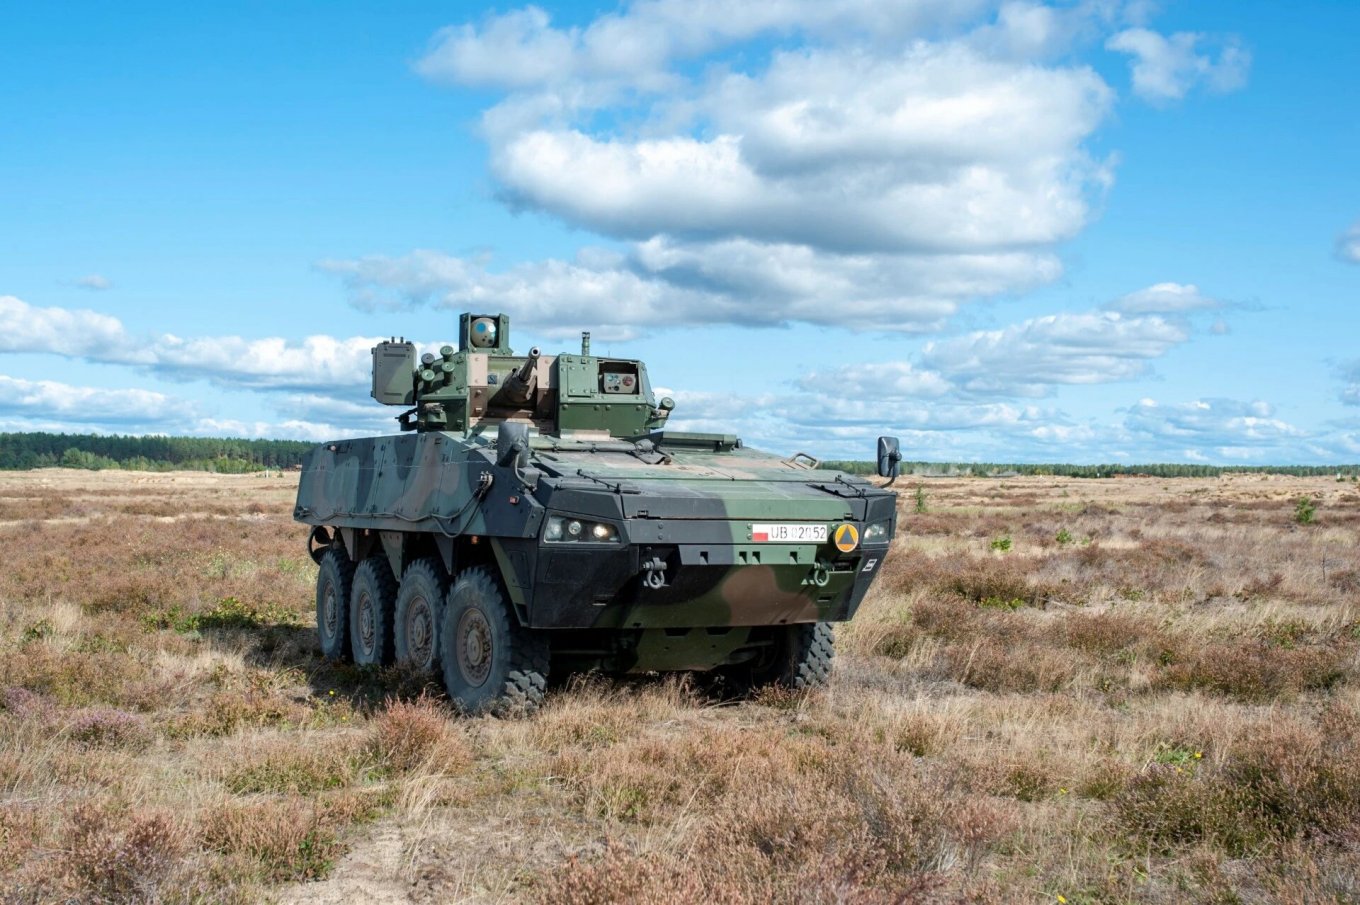 Poland Has Already Delivered 100 Rosomak Armored Combat Vehicles to Ukraine, Polish Rosomak in the basic version with the ZSSW-30 weapon station, Defense Express